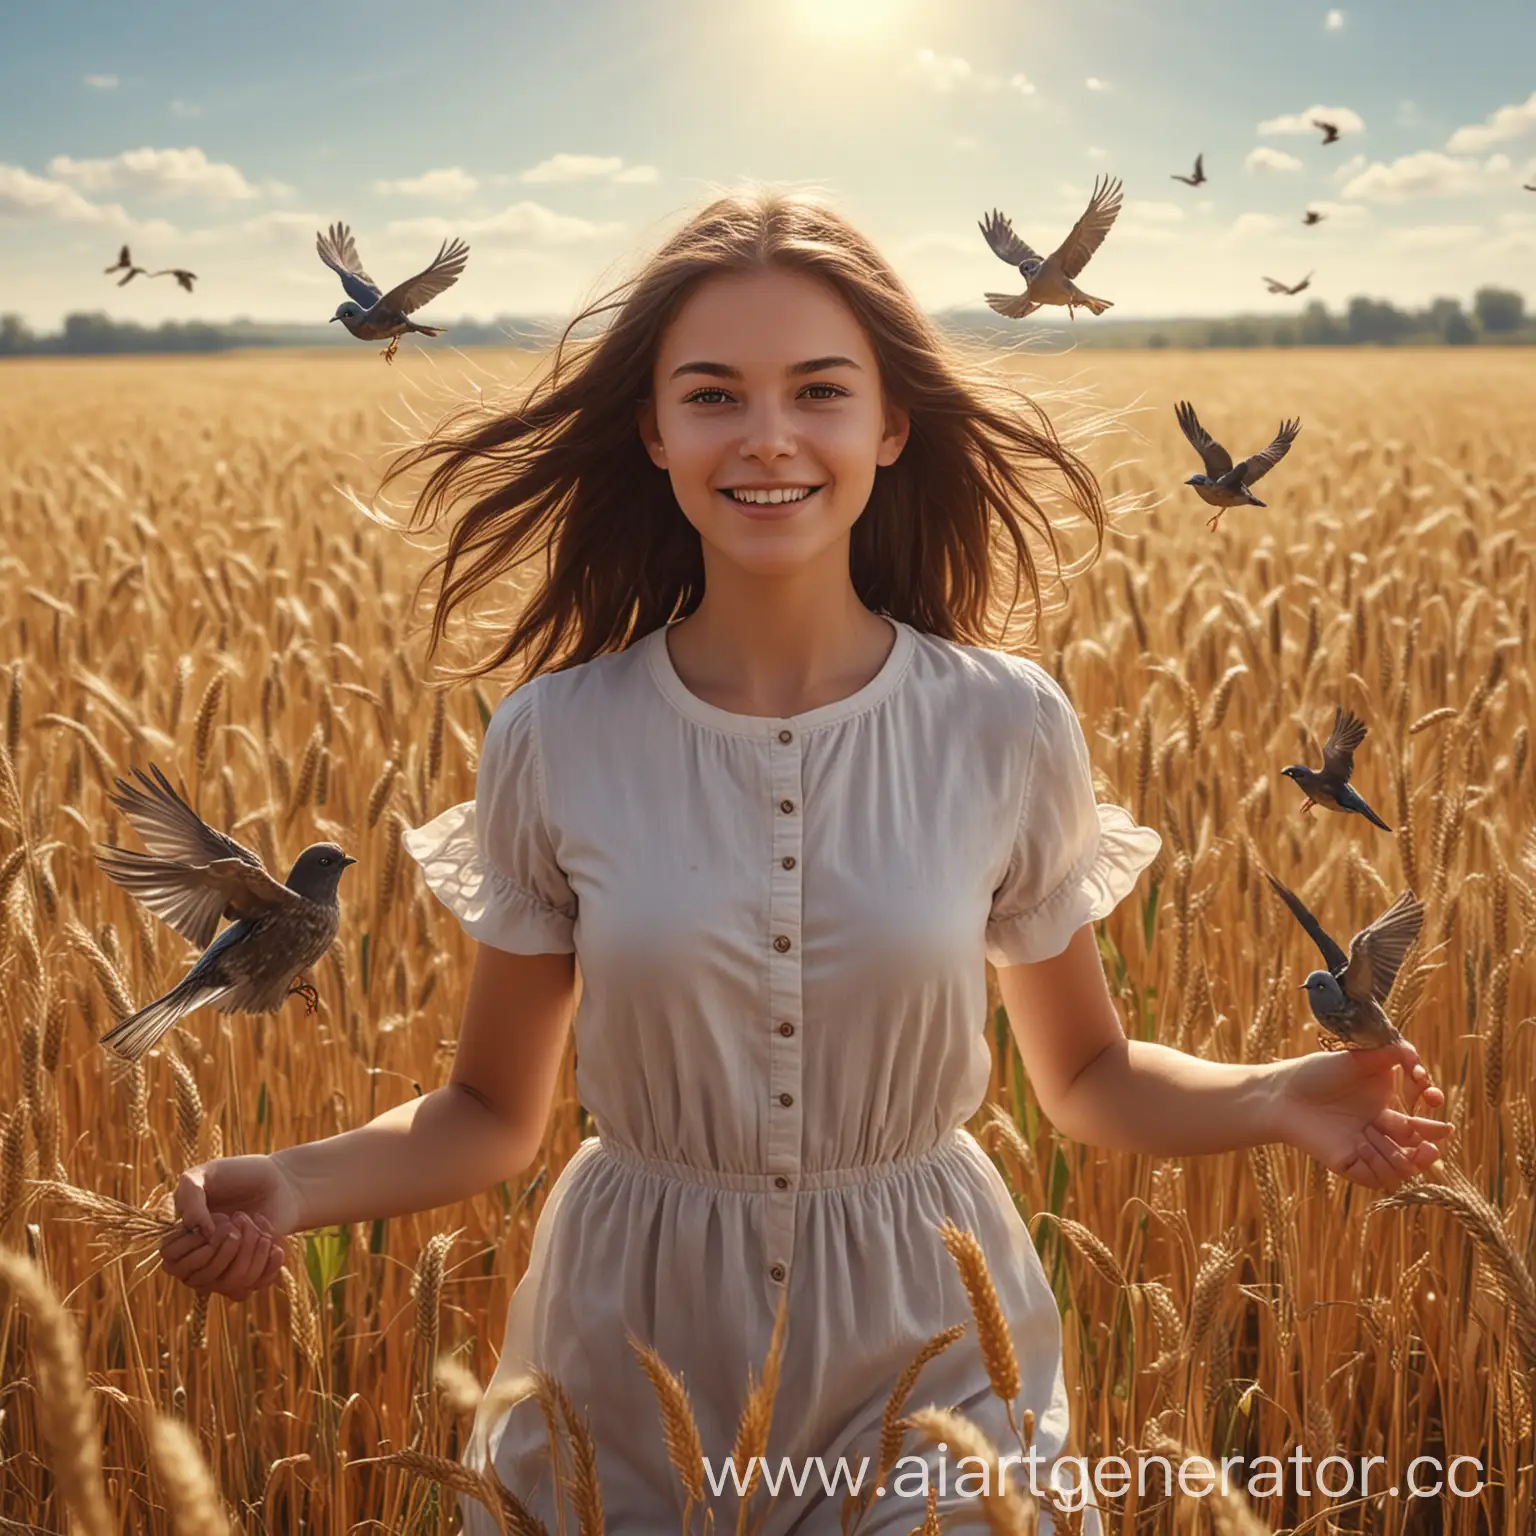 Brunette-Vegan-Girl-Surrounded-by-Wheat-Sprouts-in-Sunlit-Field-with-Birds